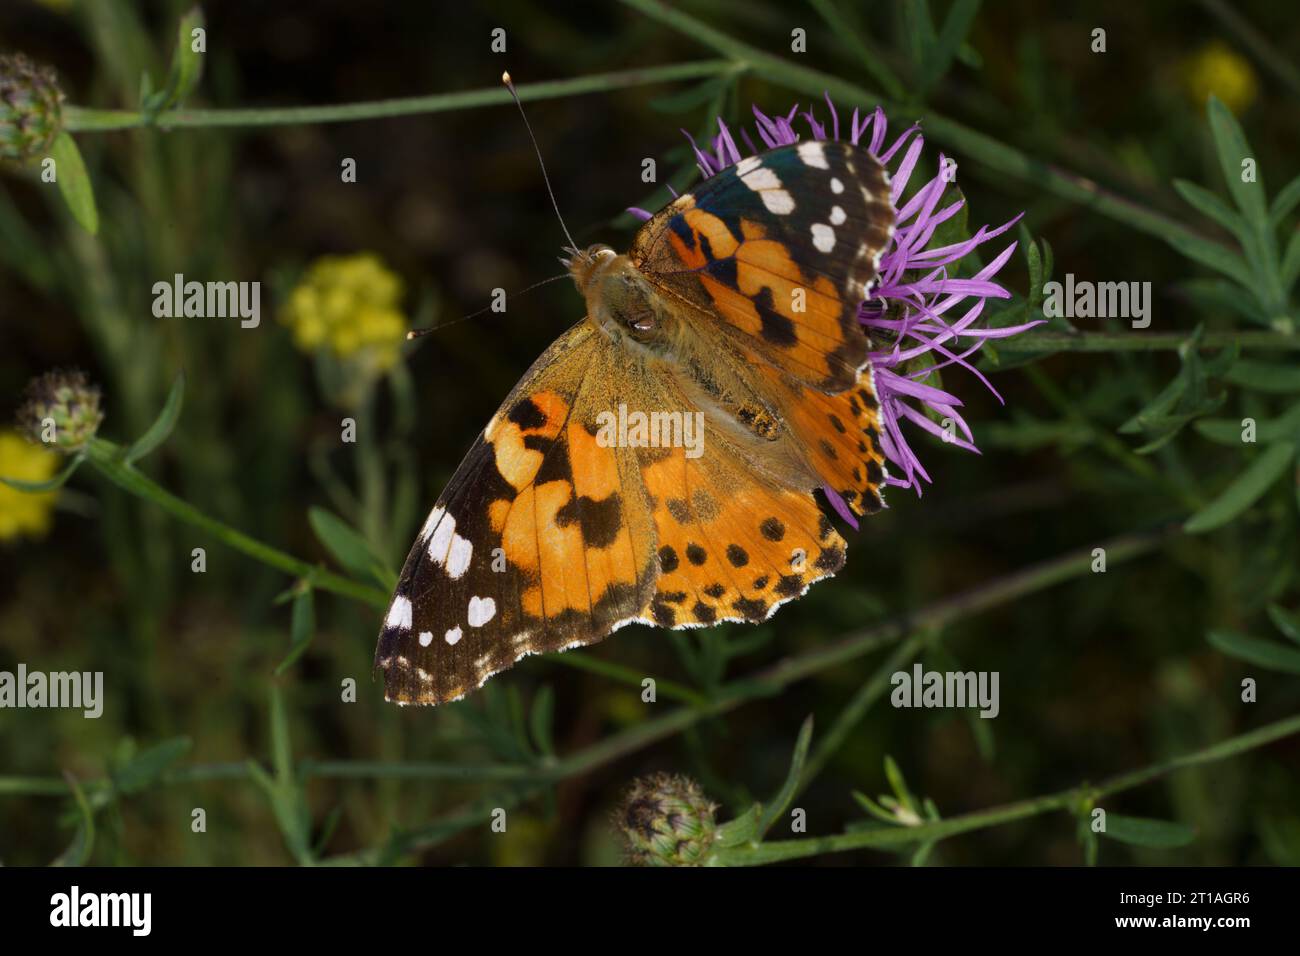 Vanessa cardui Family Nymphalidae Genus Vanessa Painted lady butterfly wild nature insect photography, picture, wallpaper Stock Photo